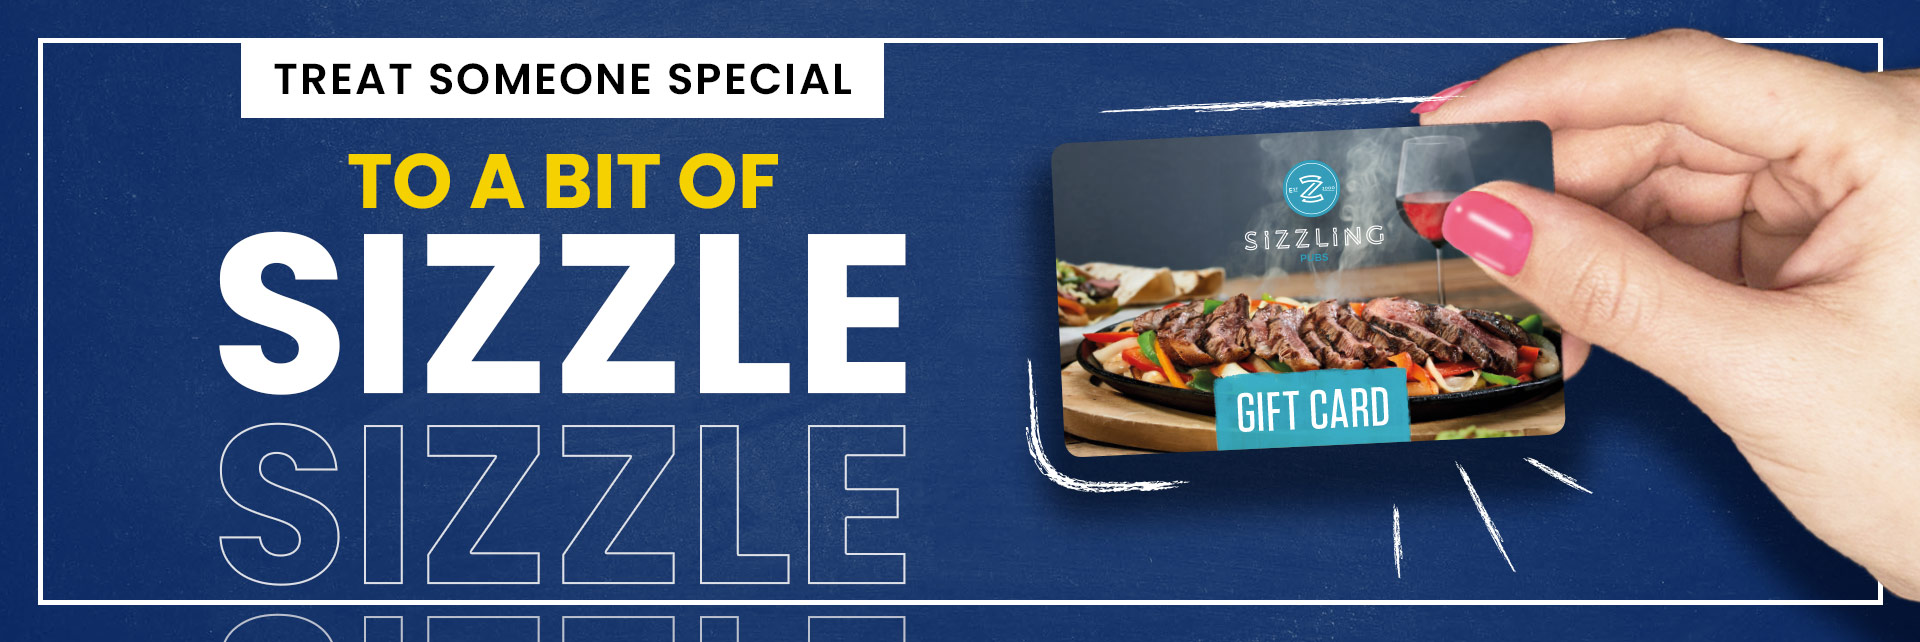 Sizzling Pubs Gift Card at The Manor in Weston-Super-Mare